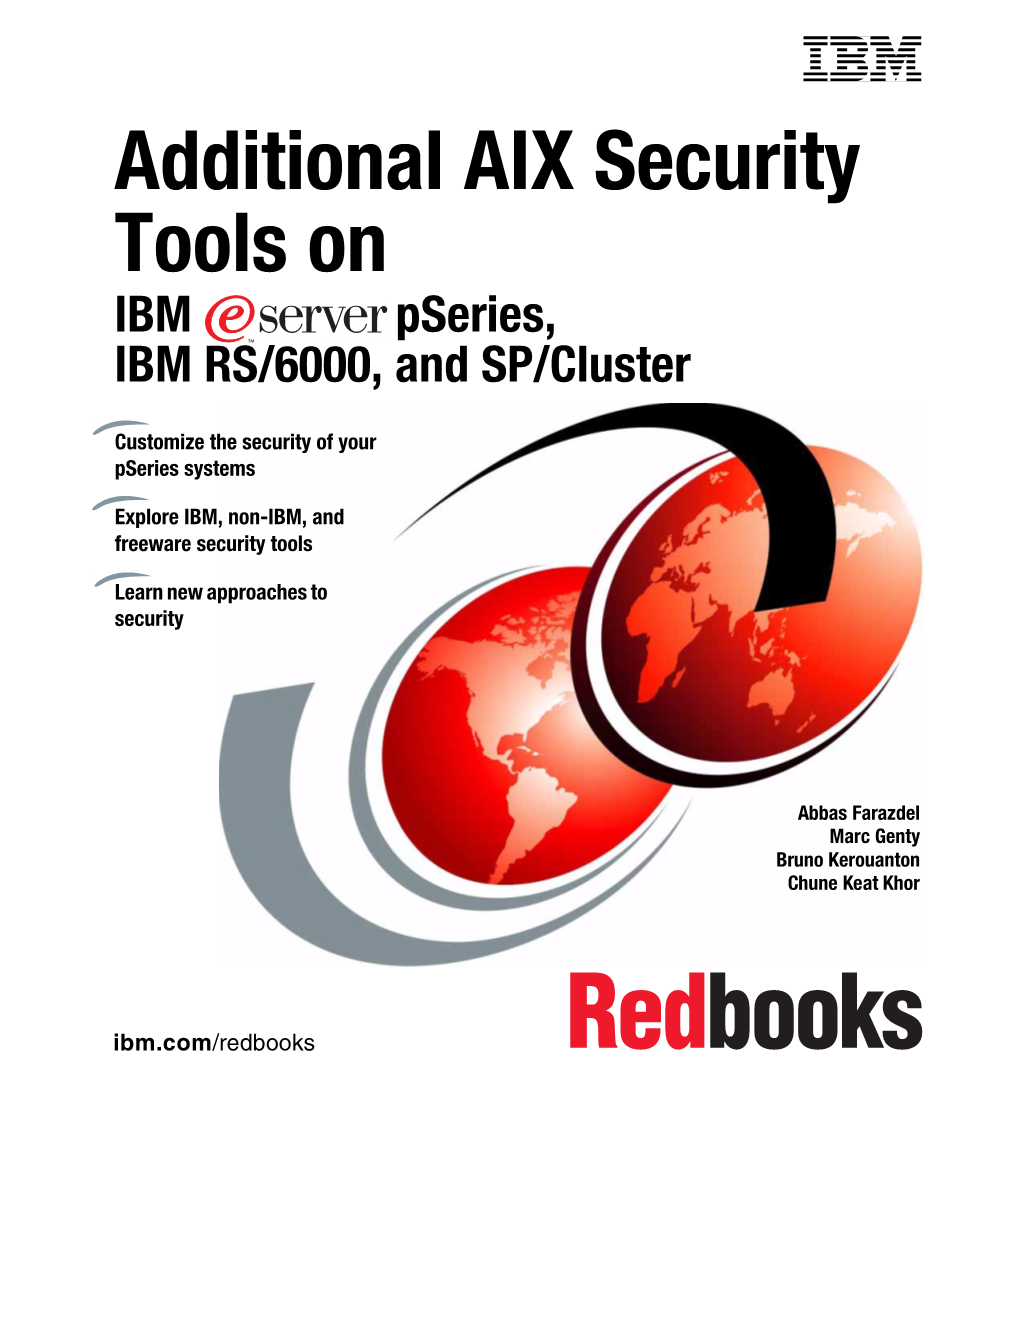 Additional AIX Security Tools on IBM Pseries, IBM RS/6000, and SP/Cluster